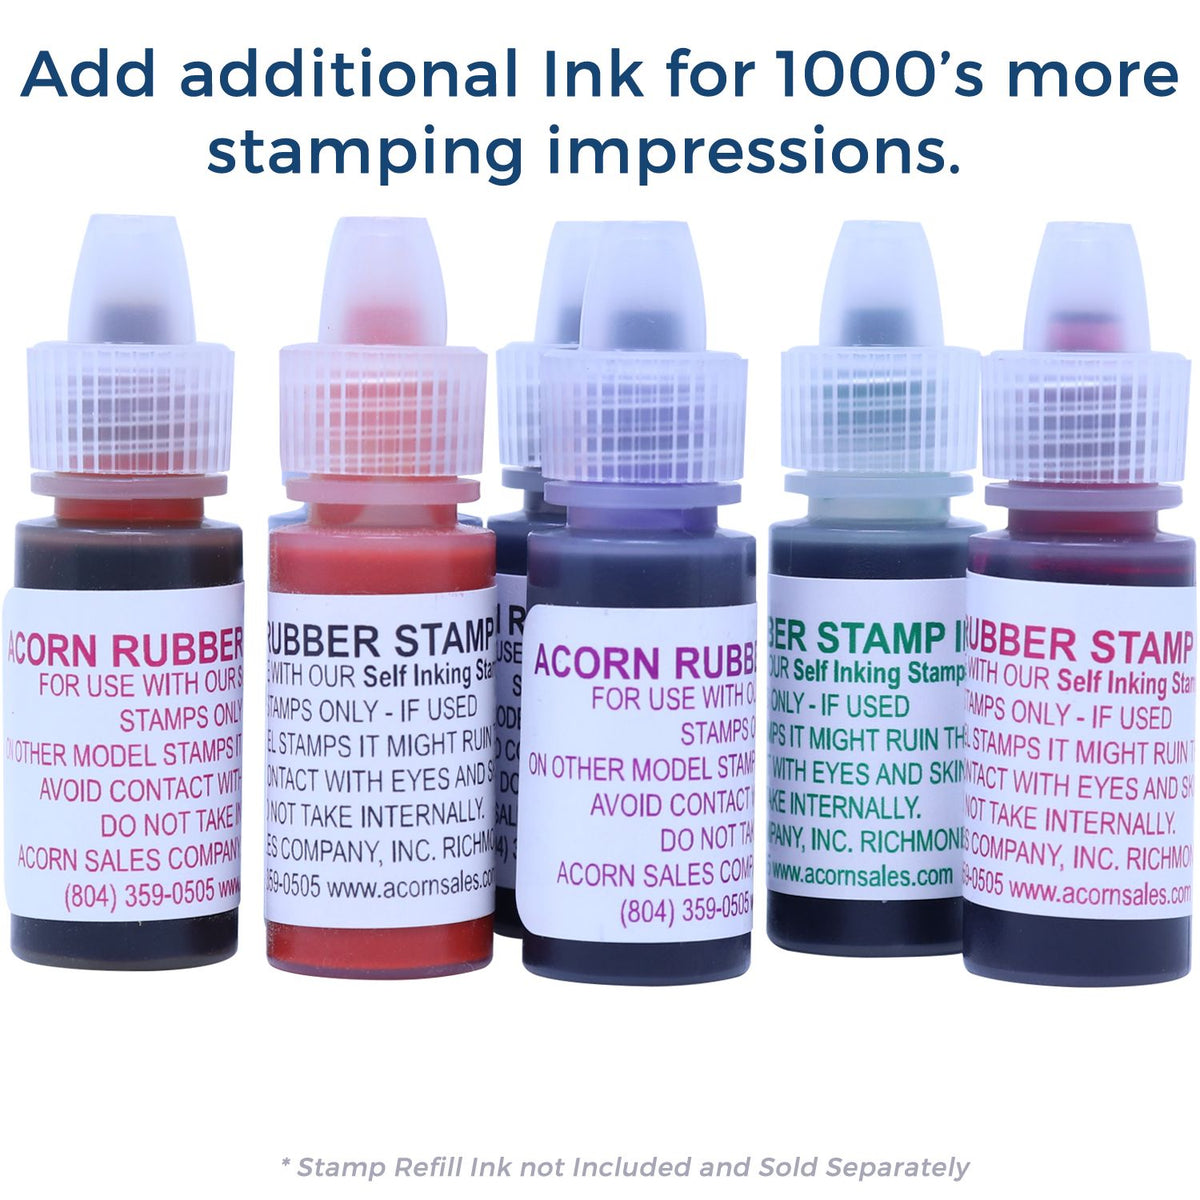 Refill Ink for Self-Inking Round Whatever Smiley Stamp Available